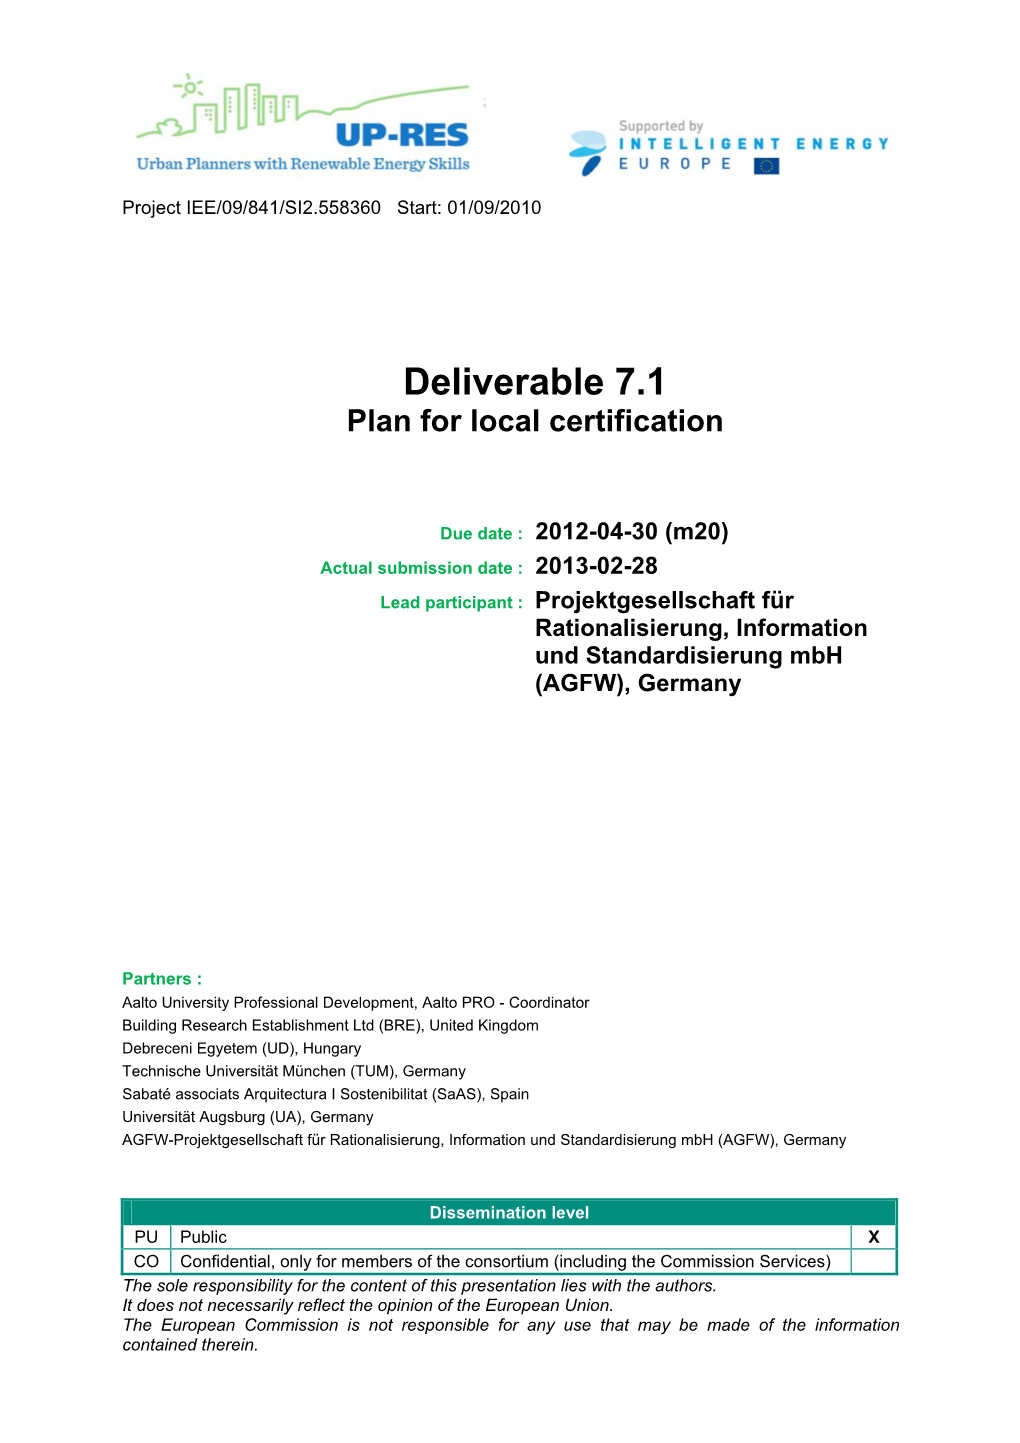 Deliverable 7.1 Plan for Local Certification